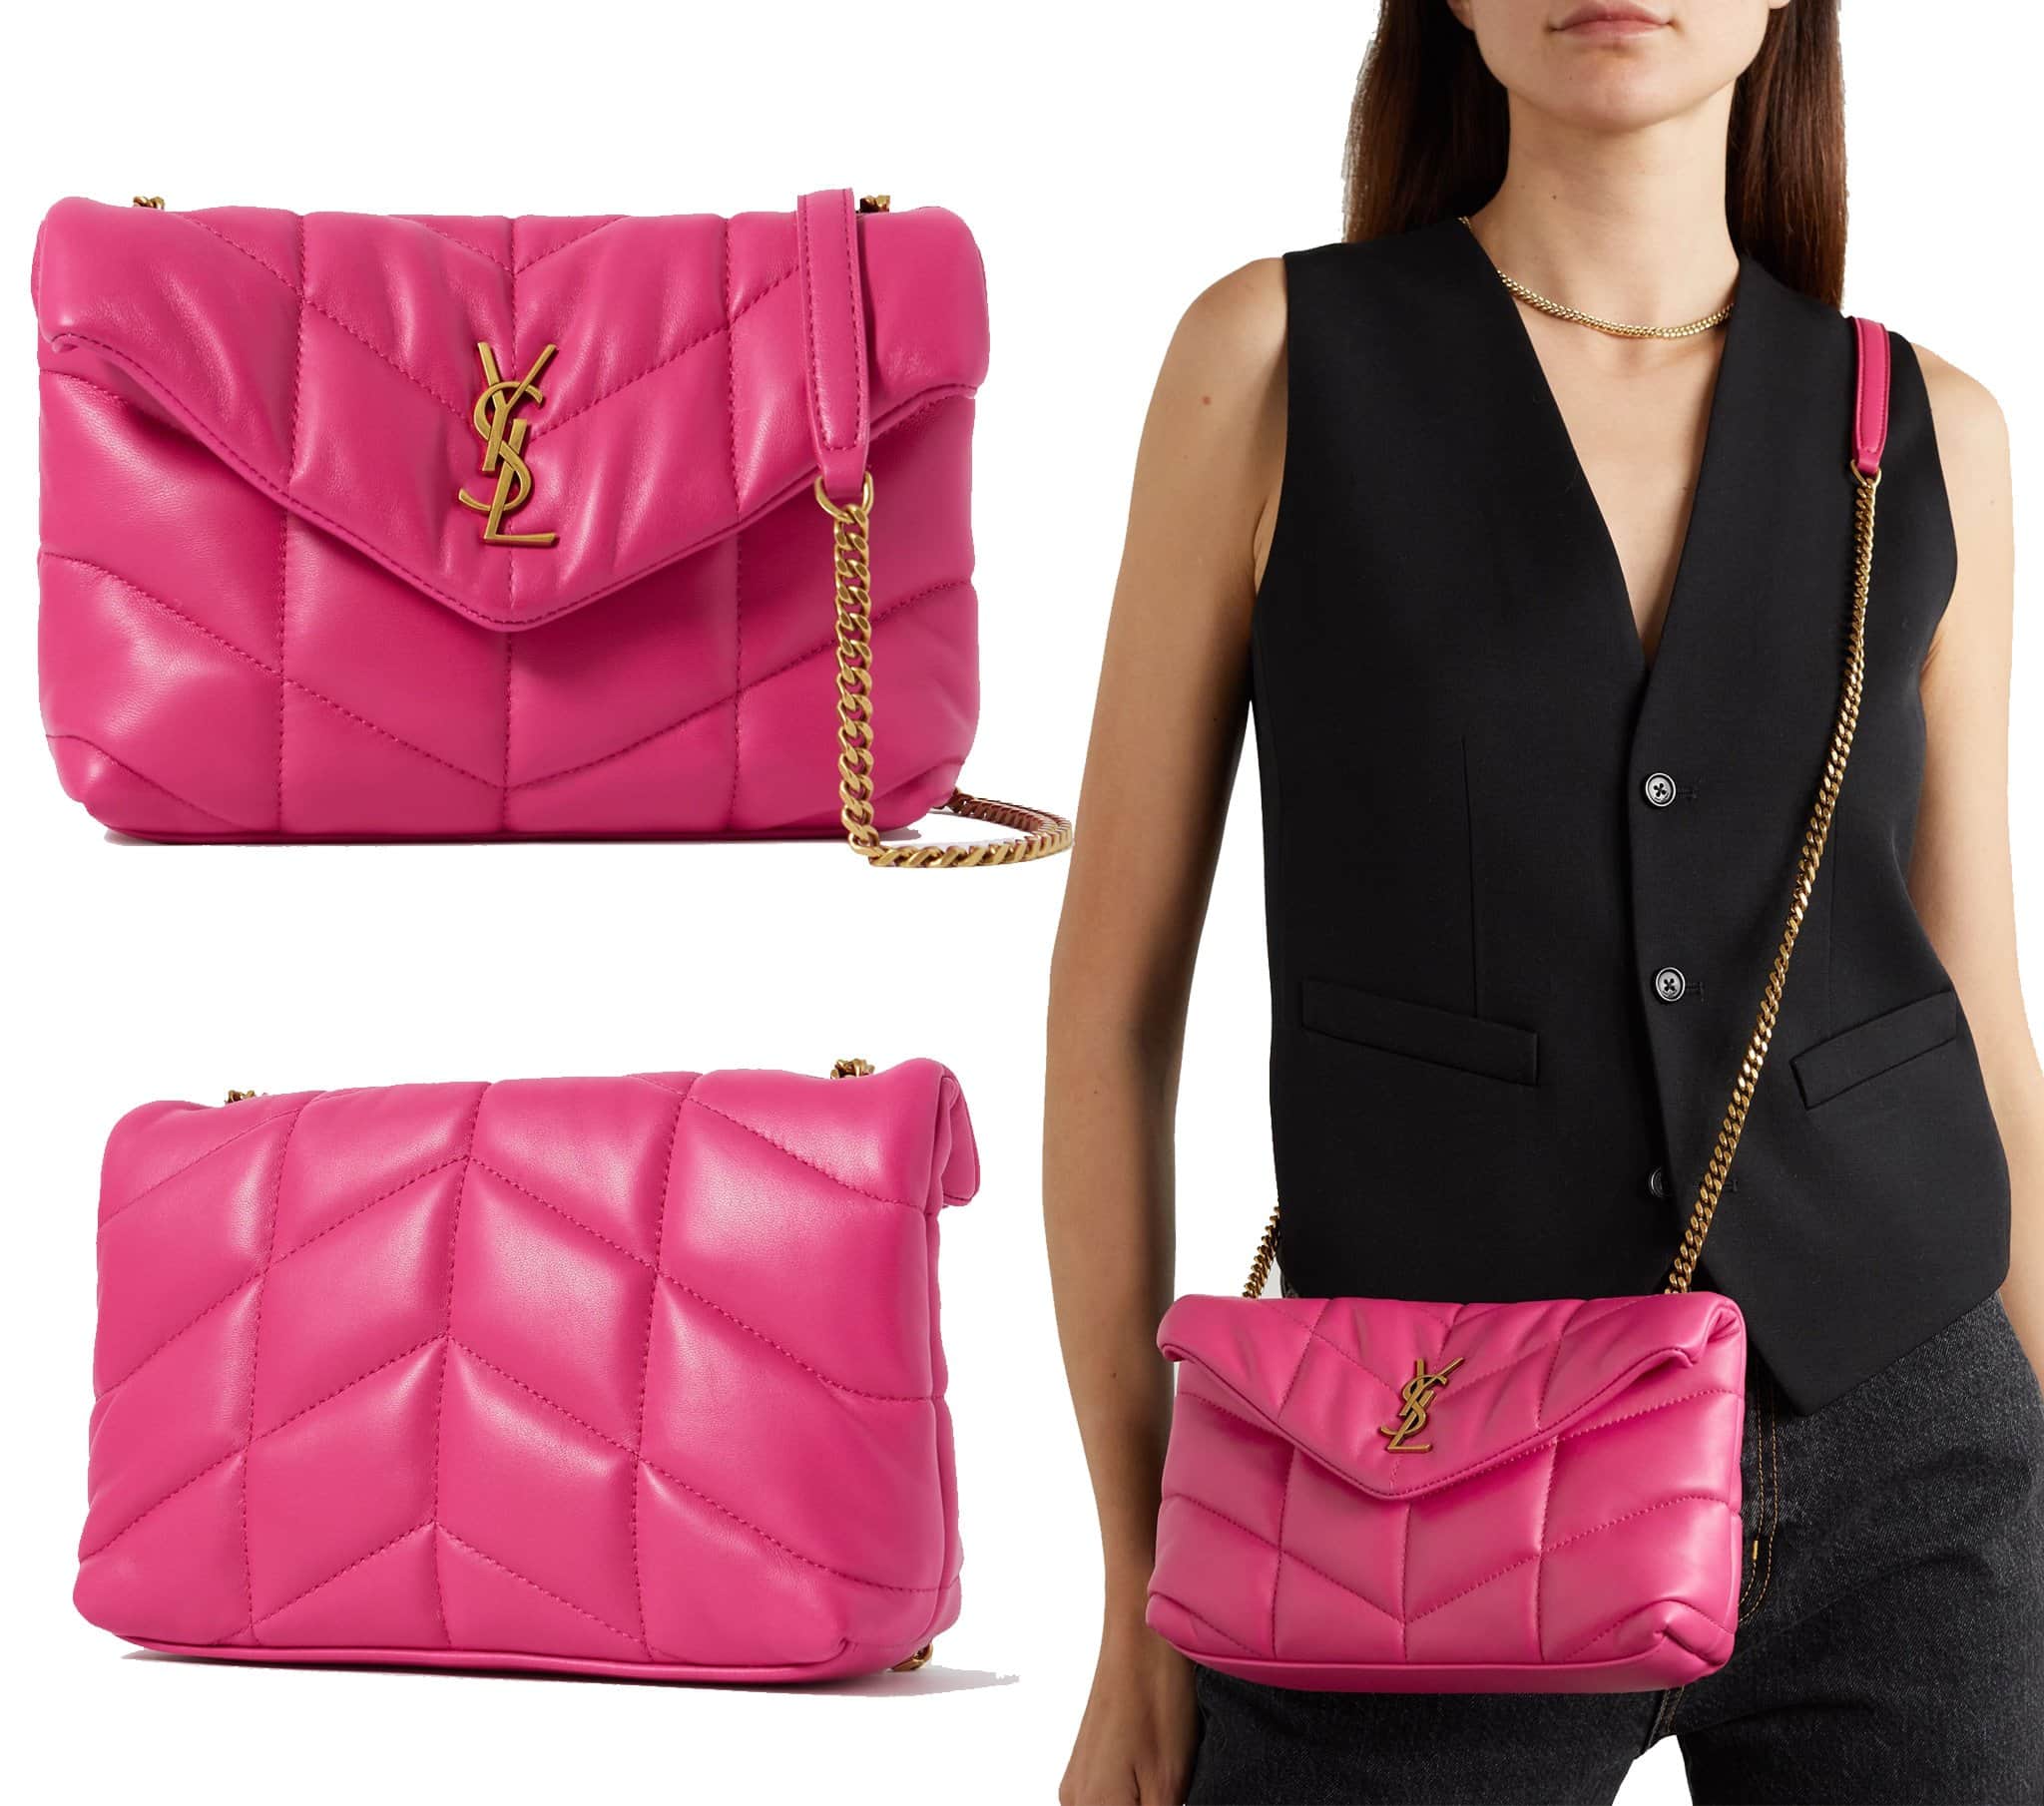 Expertly crafted in Italy from smooth quilted leather, the Loulou shoulder bag has a detachable strap that allows you to convert it to an evening clutch